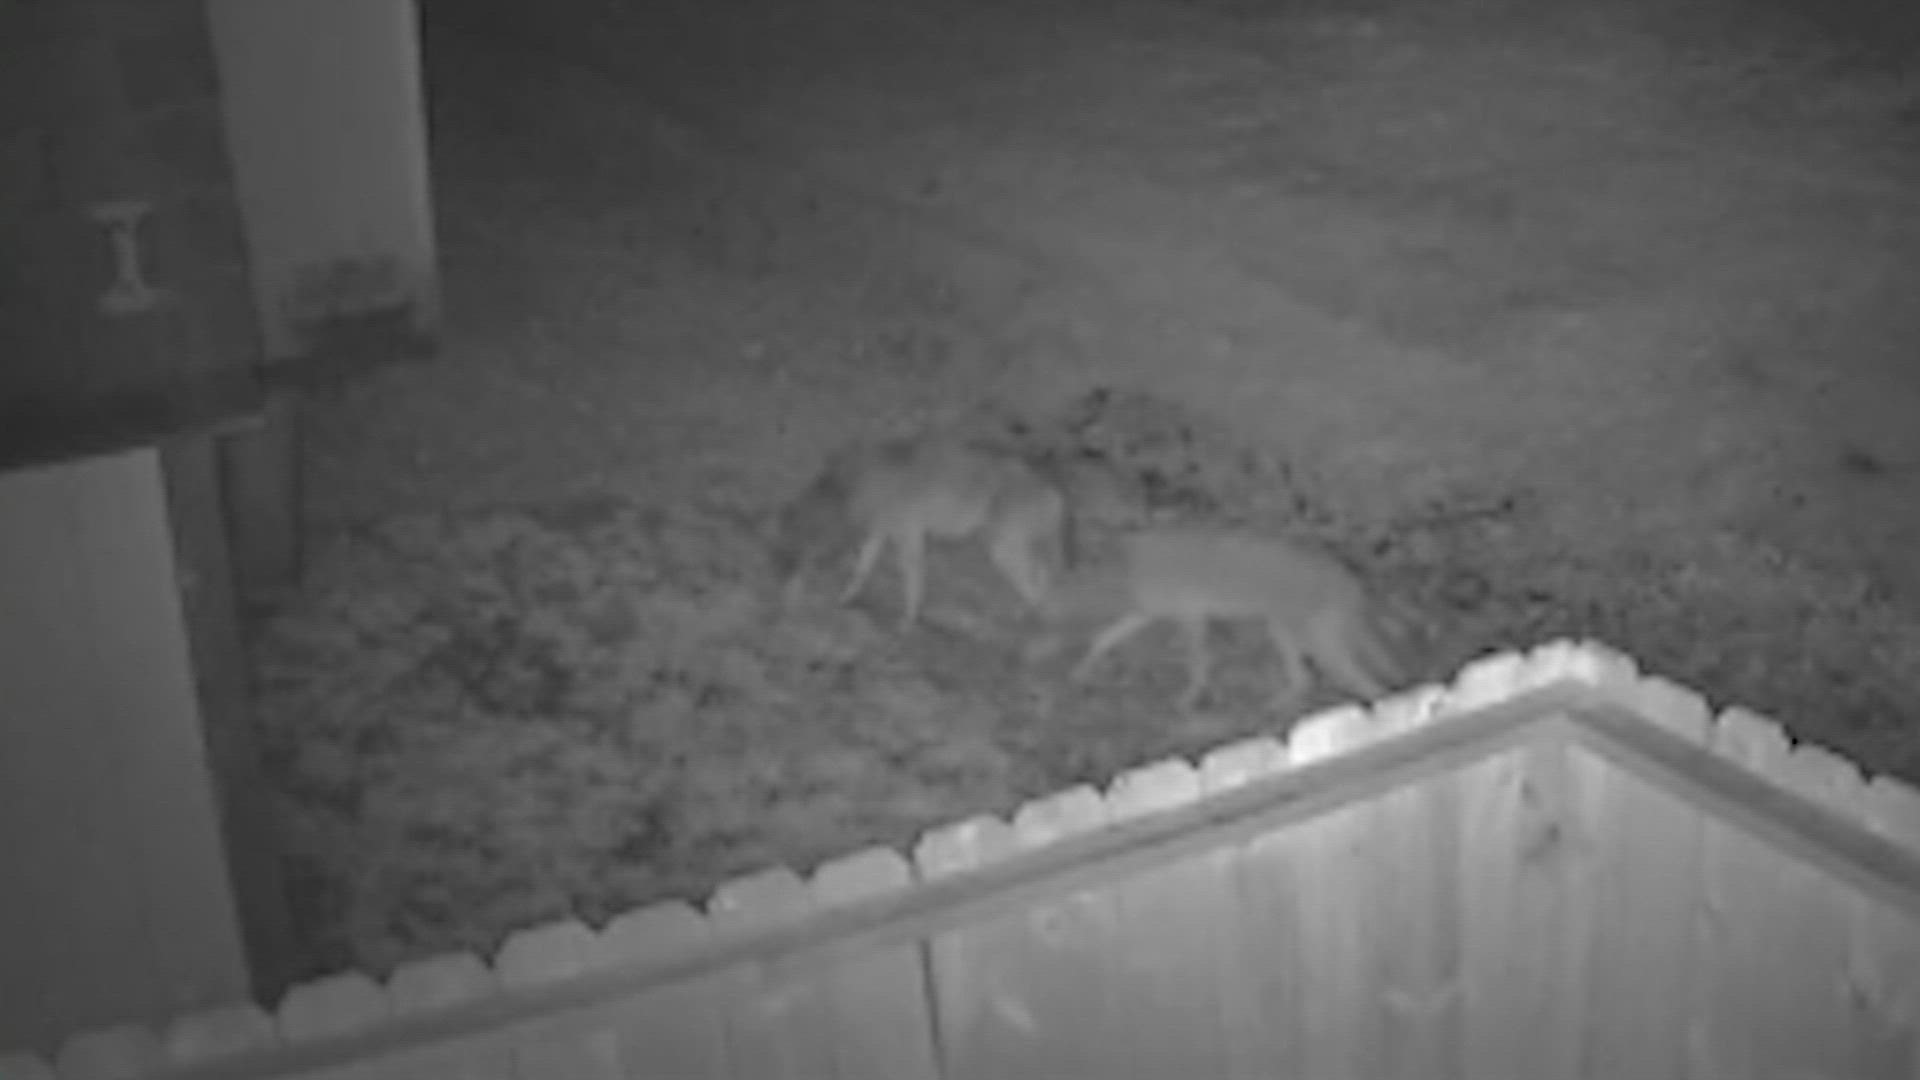 The Deer Park Police Department is doing what it can to control the coyote population by setting traps and responding to calls from worried neighbors.